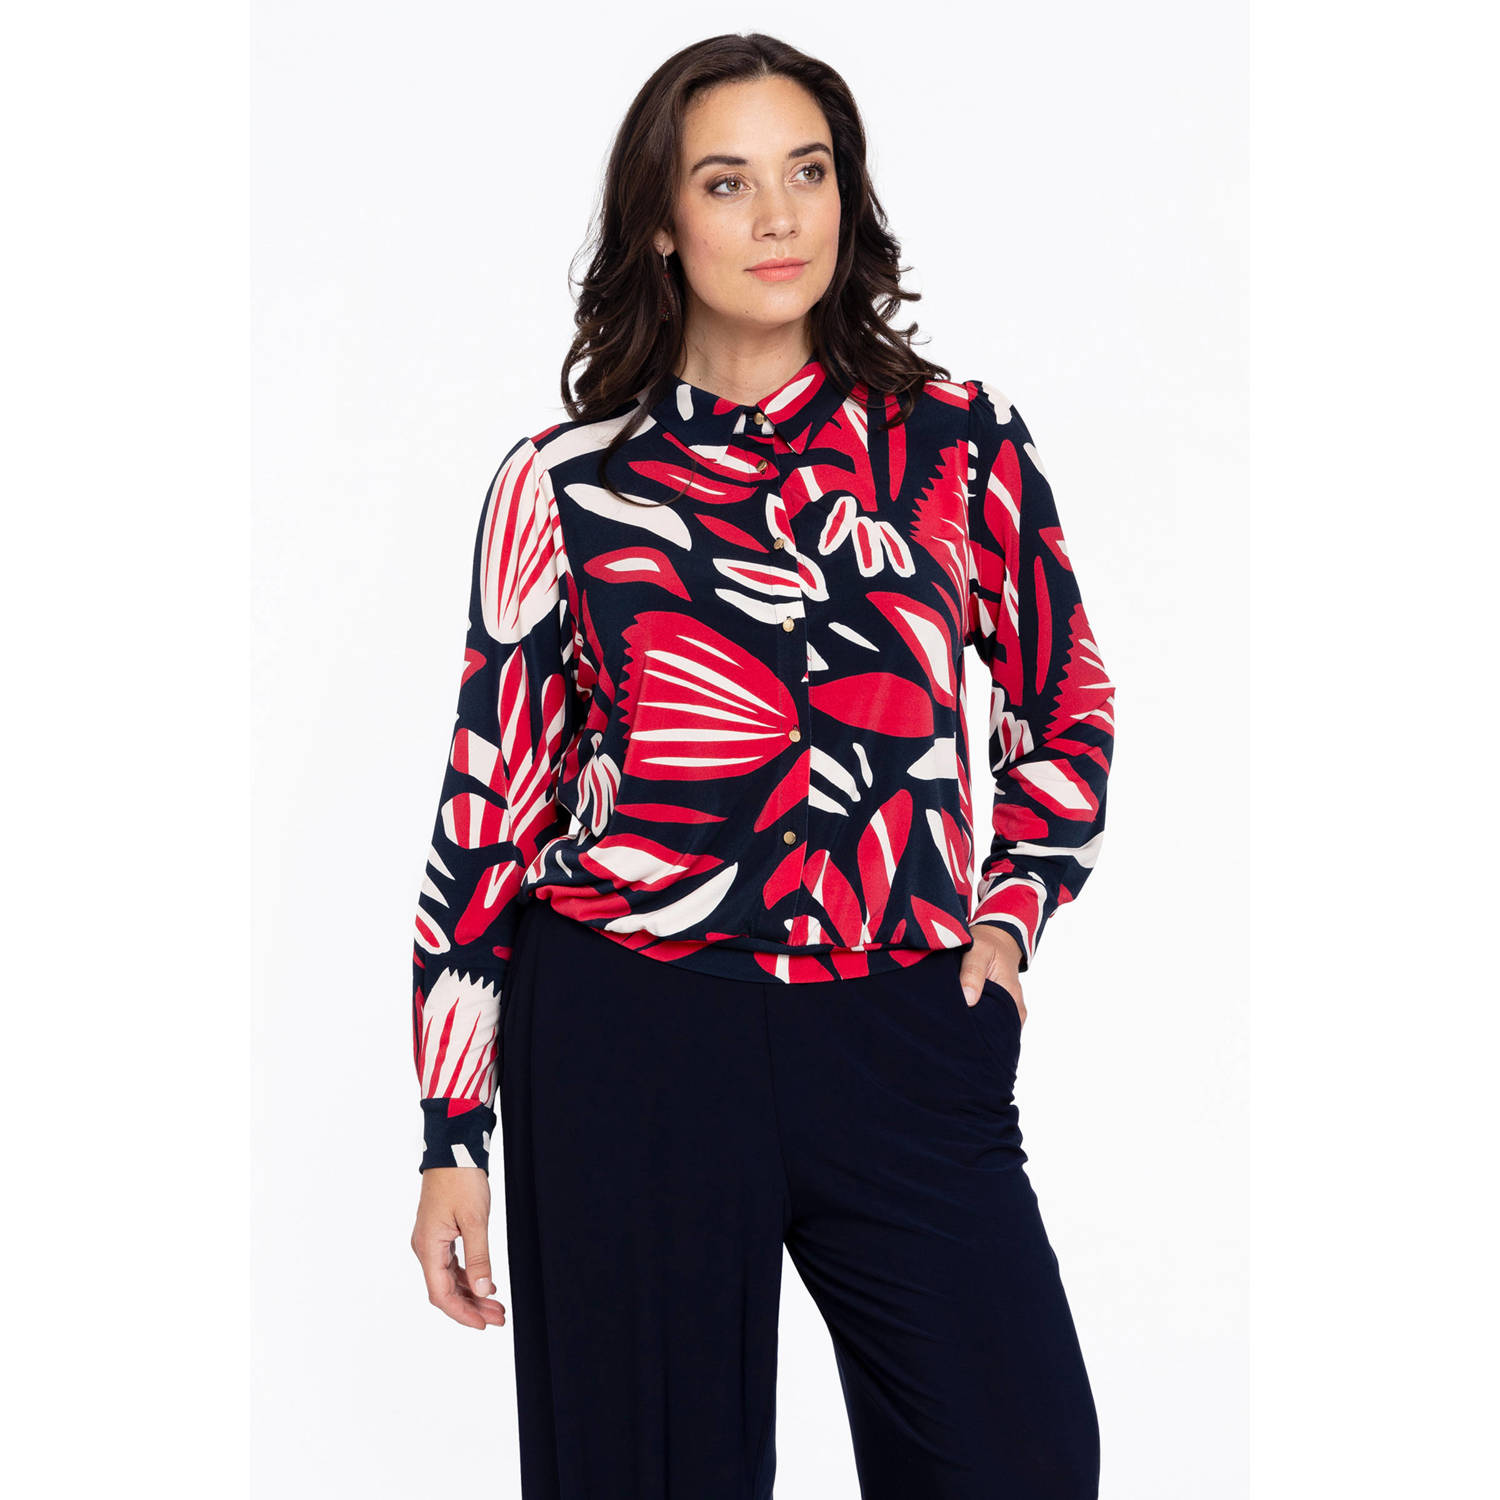 Yoek blouse DOLCE met all over print rood donkerblauw wit